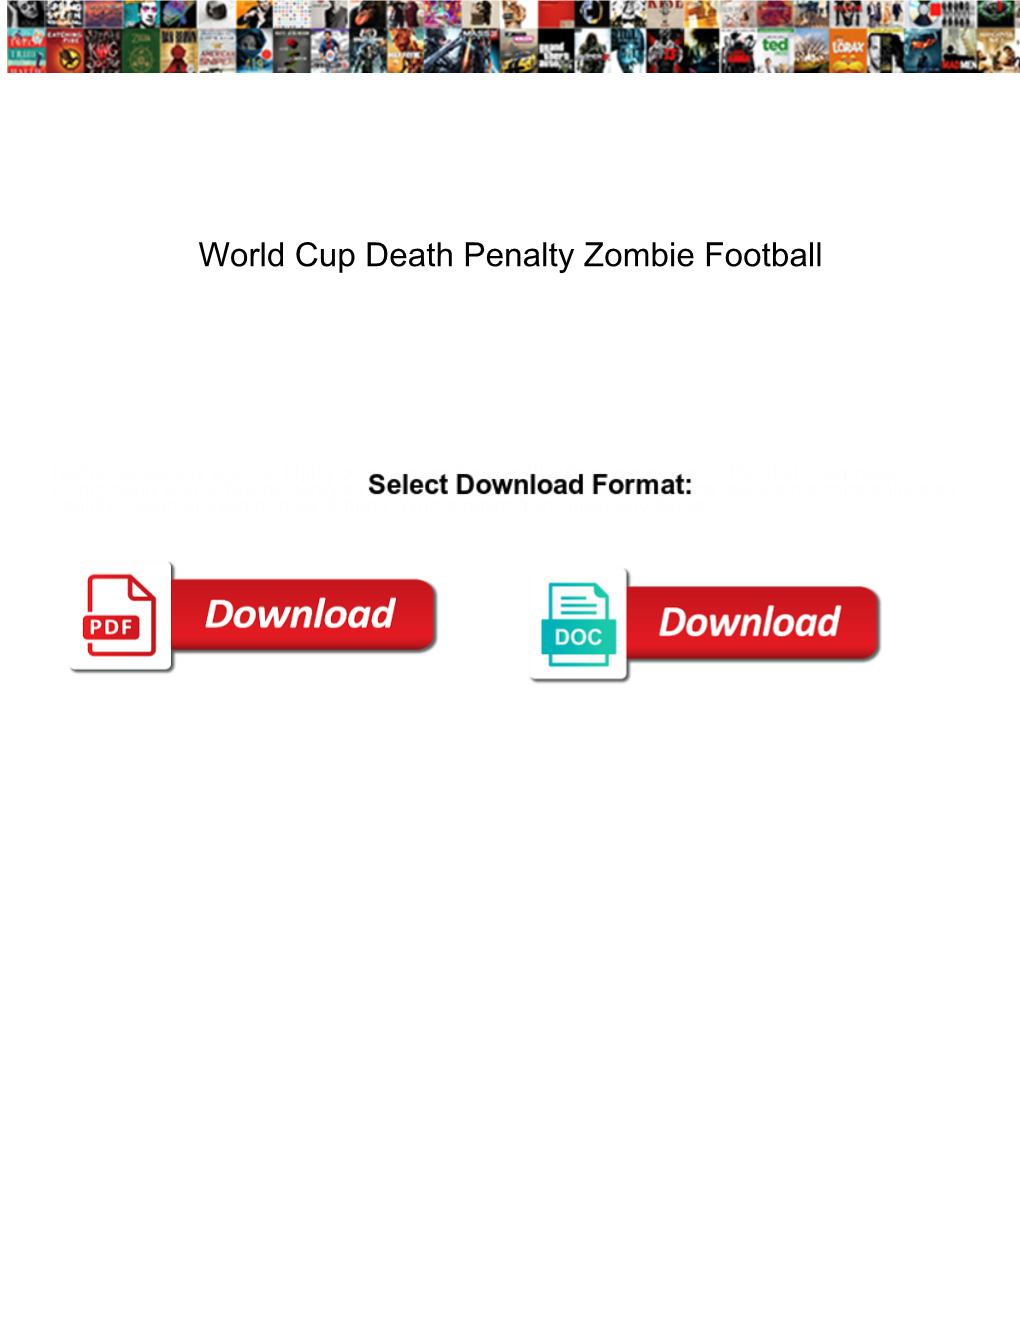 World Cup Death Penalty Zombie Football